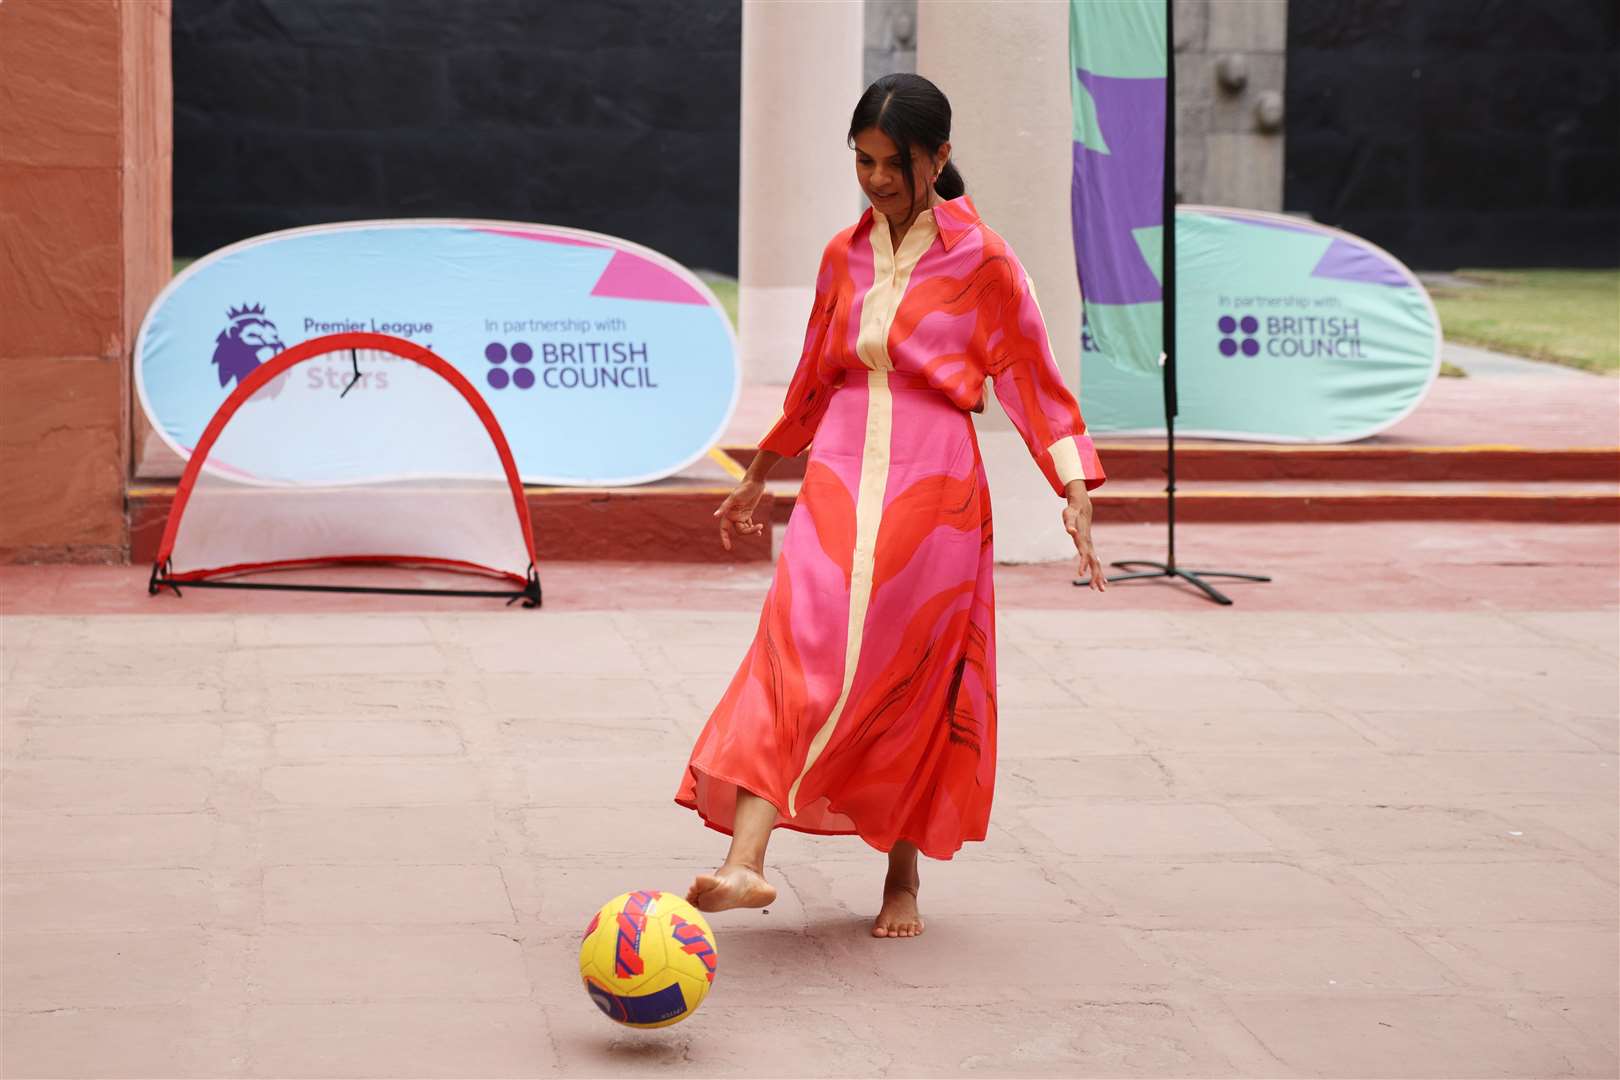 Akshata Murty took off her shoes to play football with children at the British Council in New Delhi (Dan Kitwood/PA)